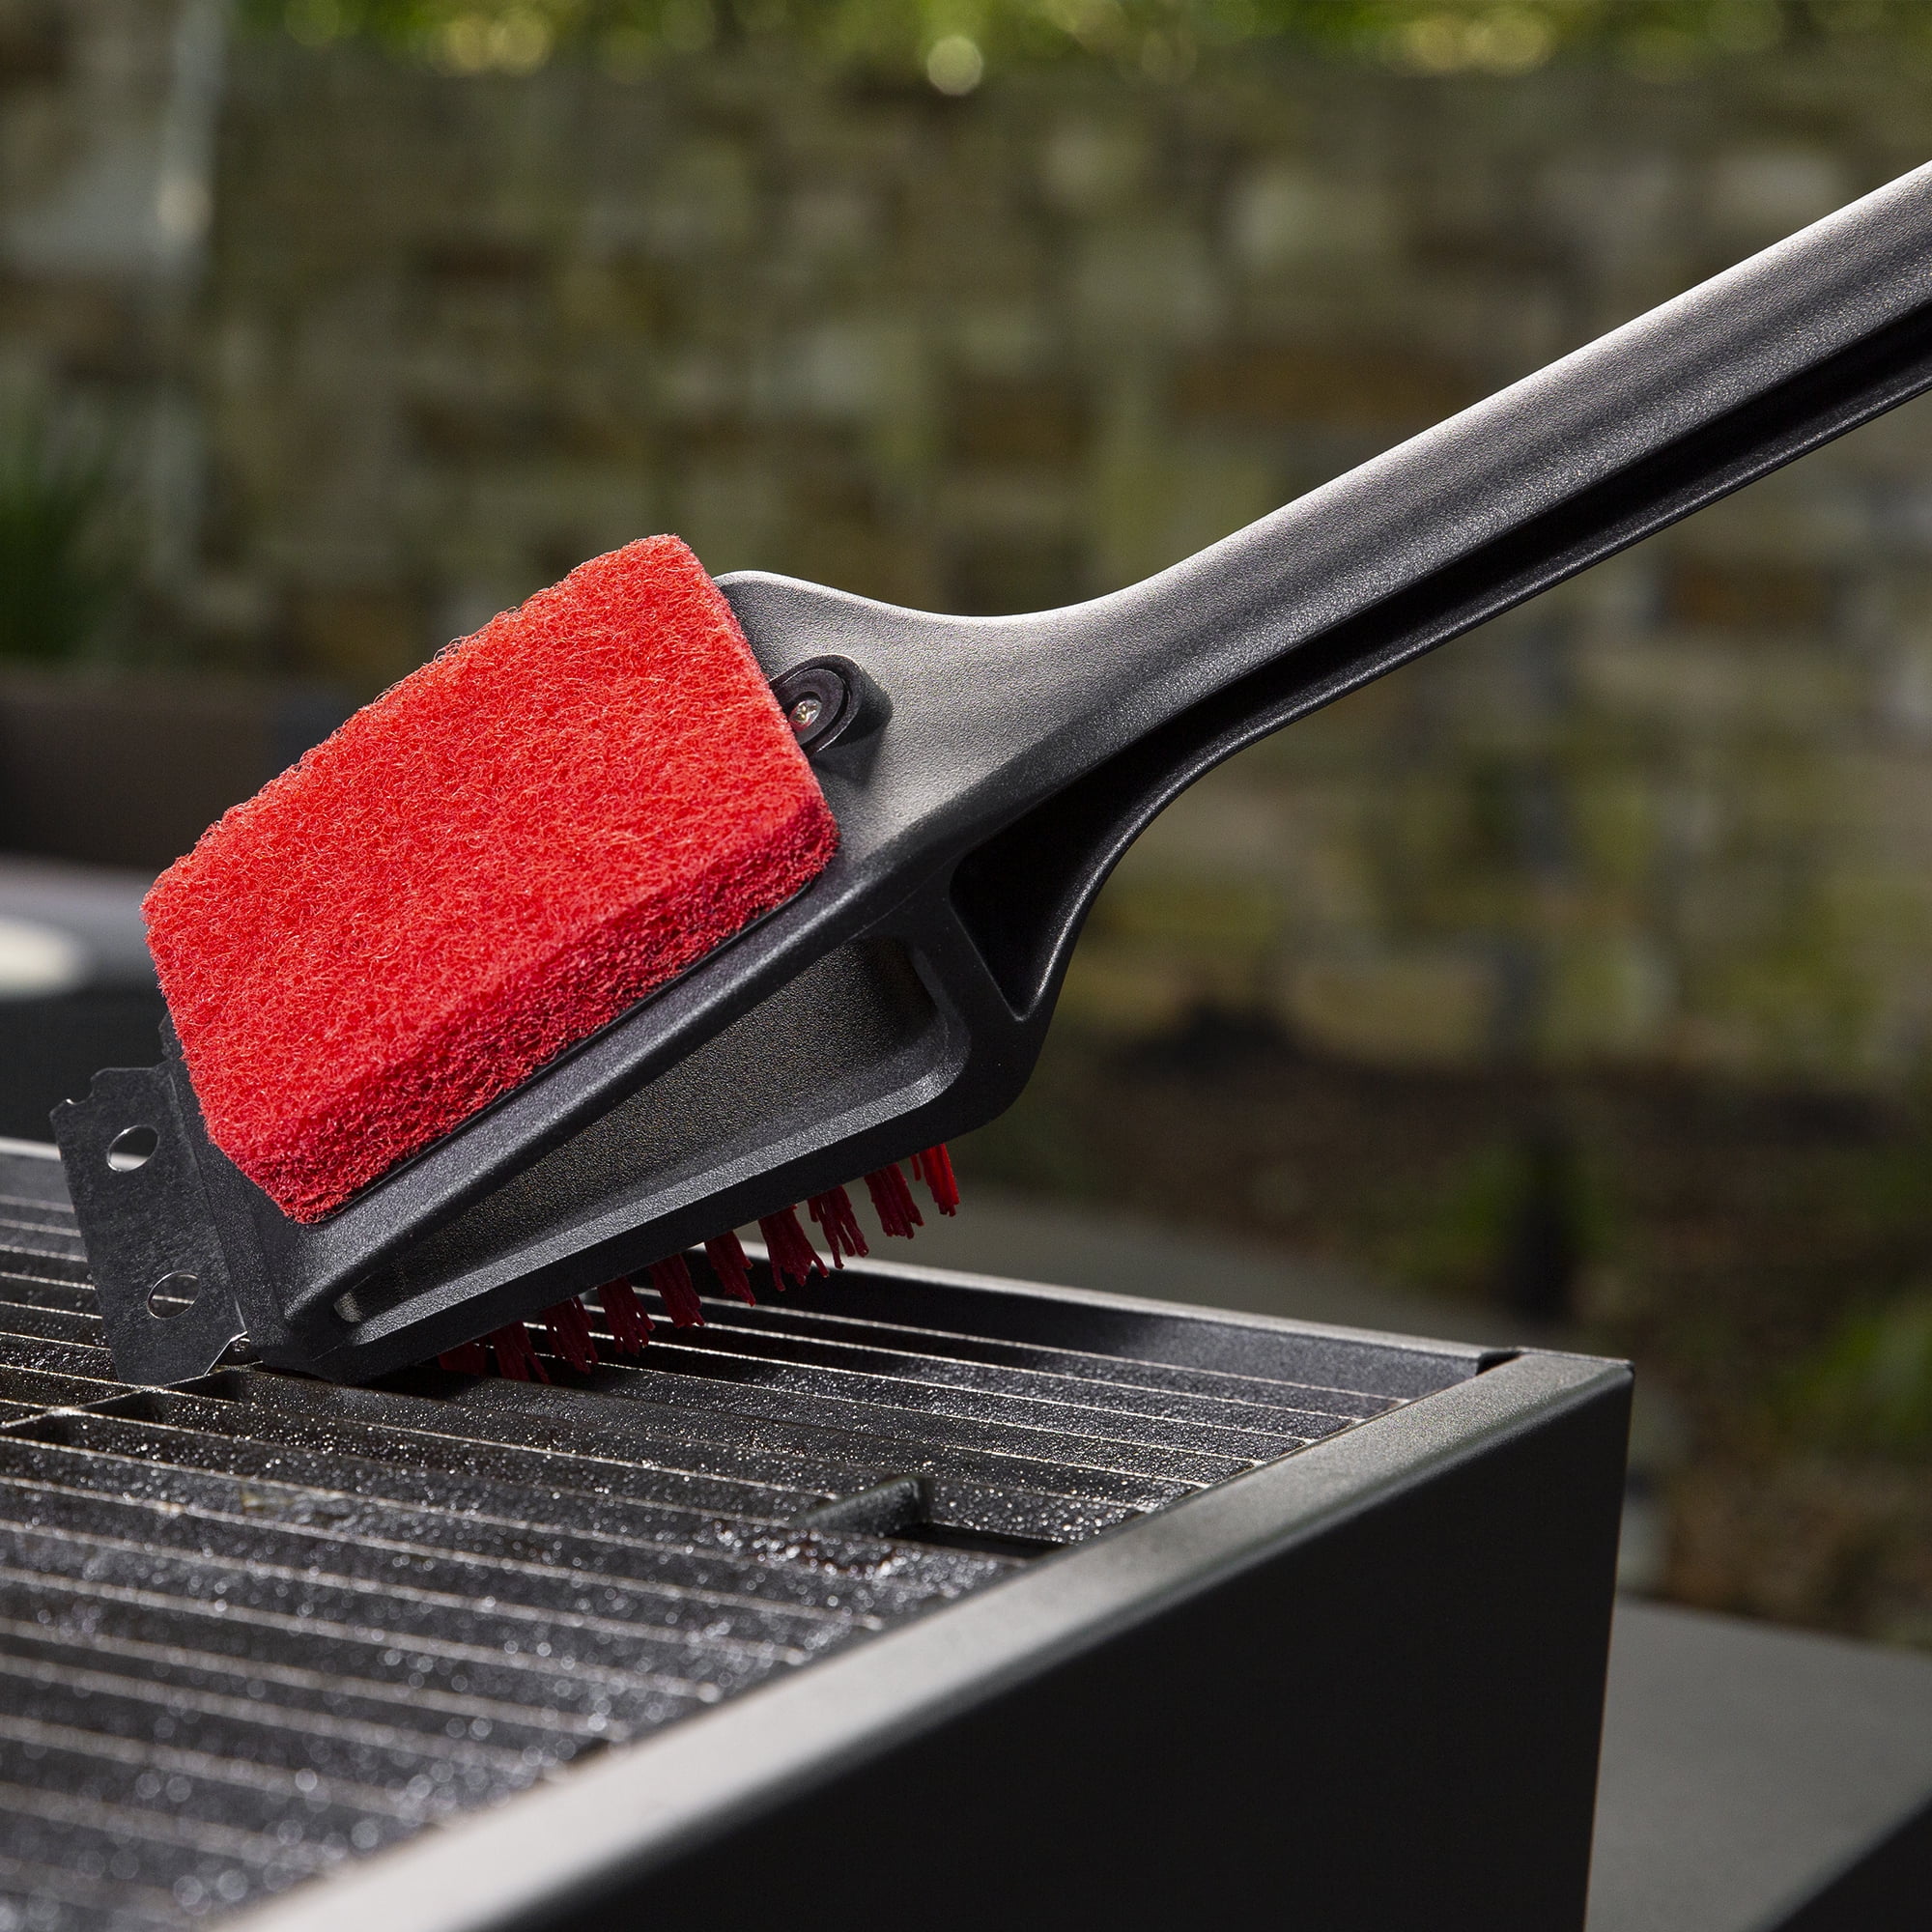 Expert Grill BBQ Grill Scrubber, Heavy Duty Black Barbecue Cleaning Scrubber